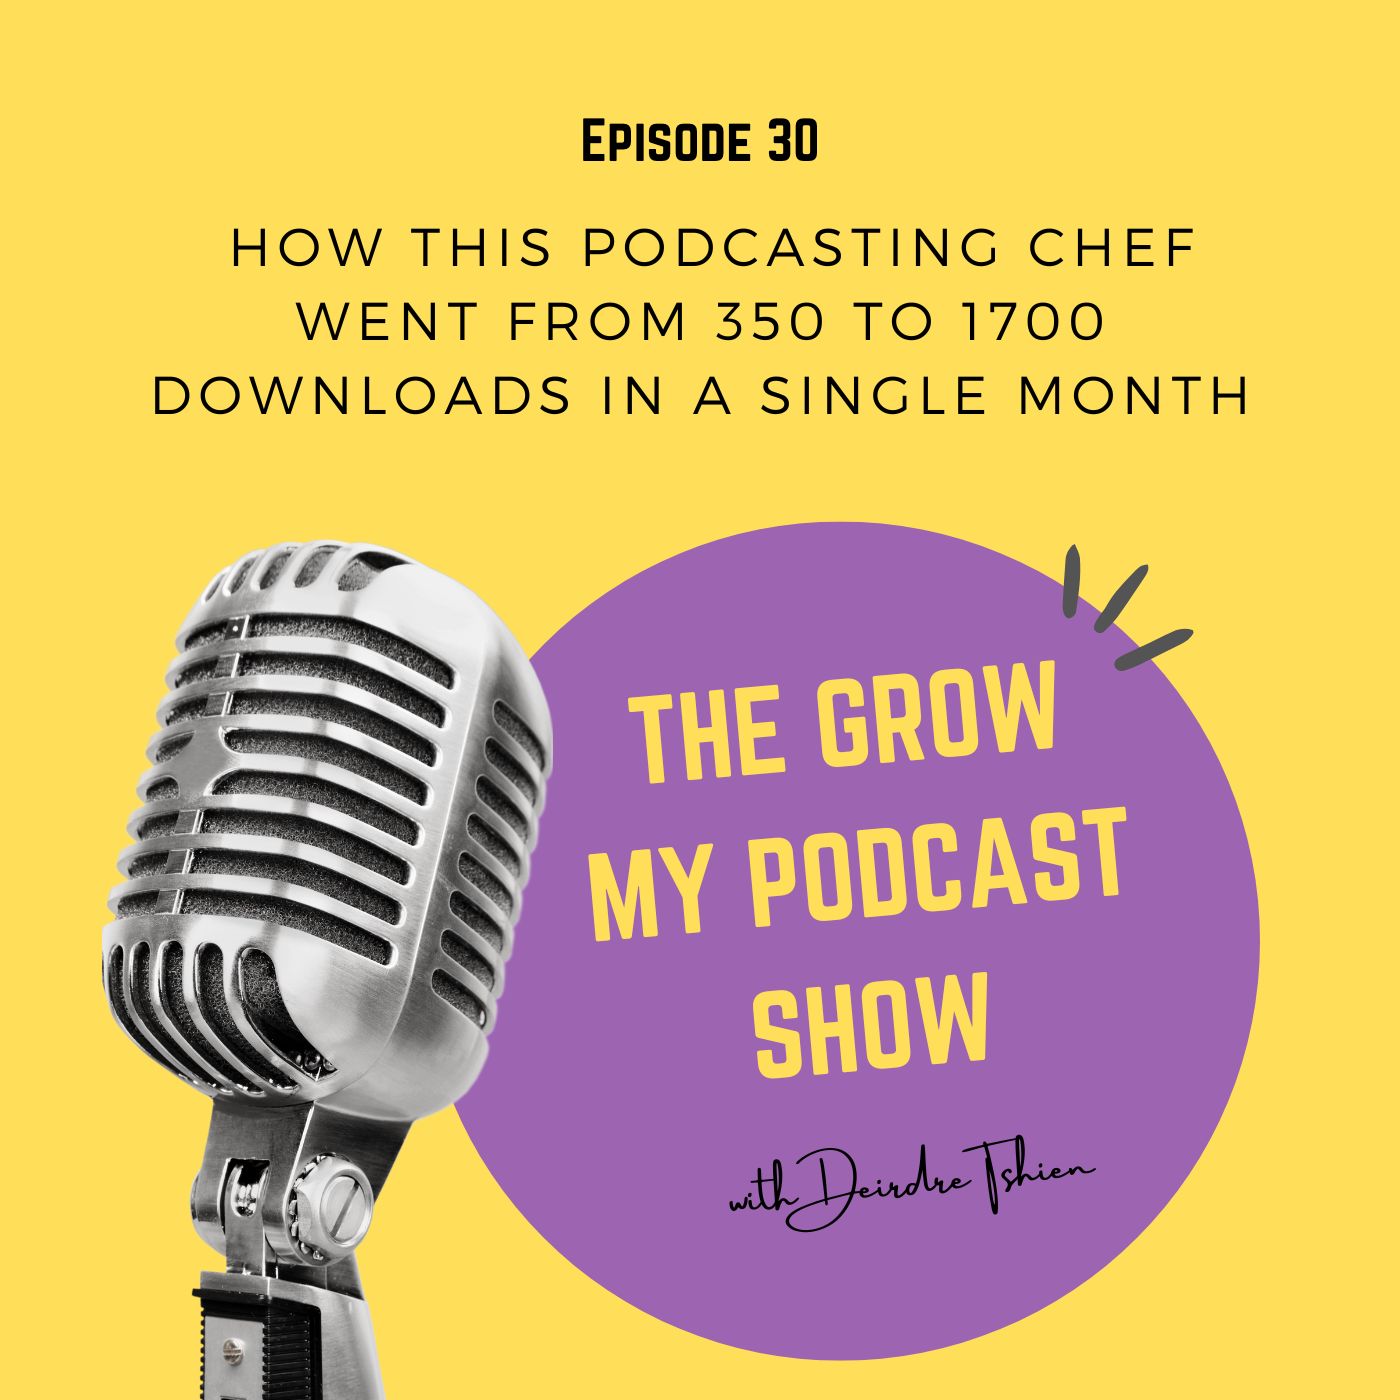 30. How this Podcasting Chef went from 350 to 1700 downloads in a single month